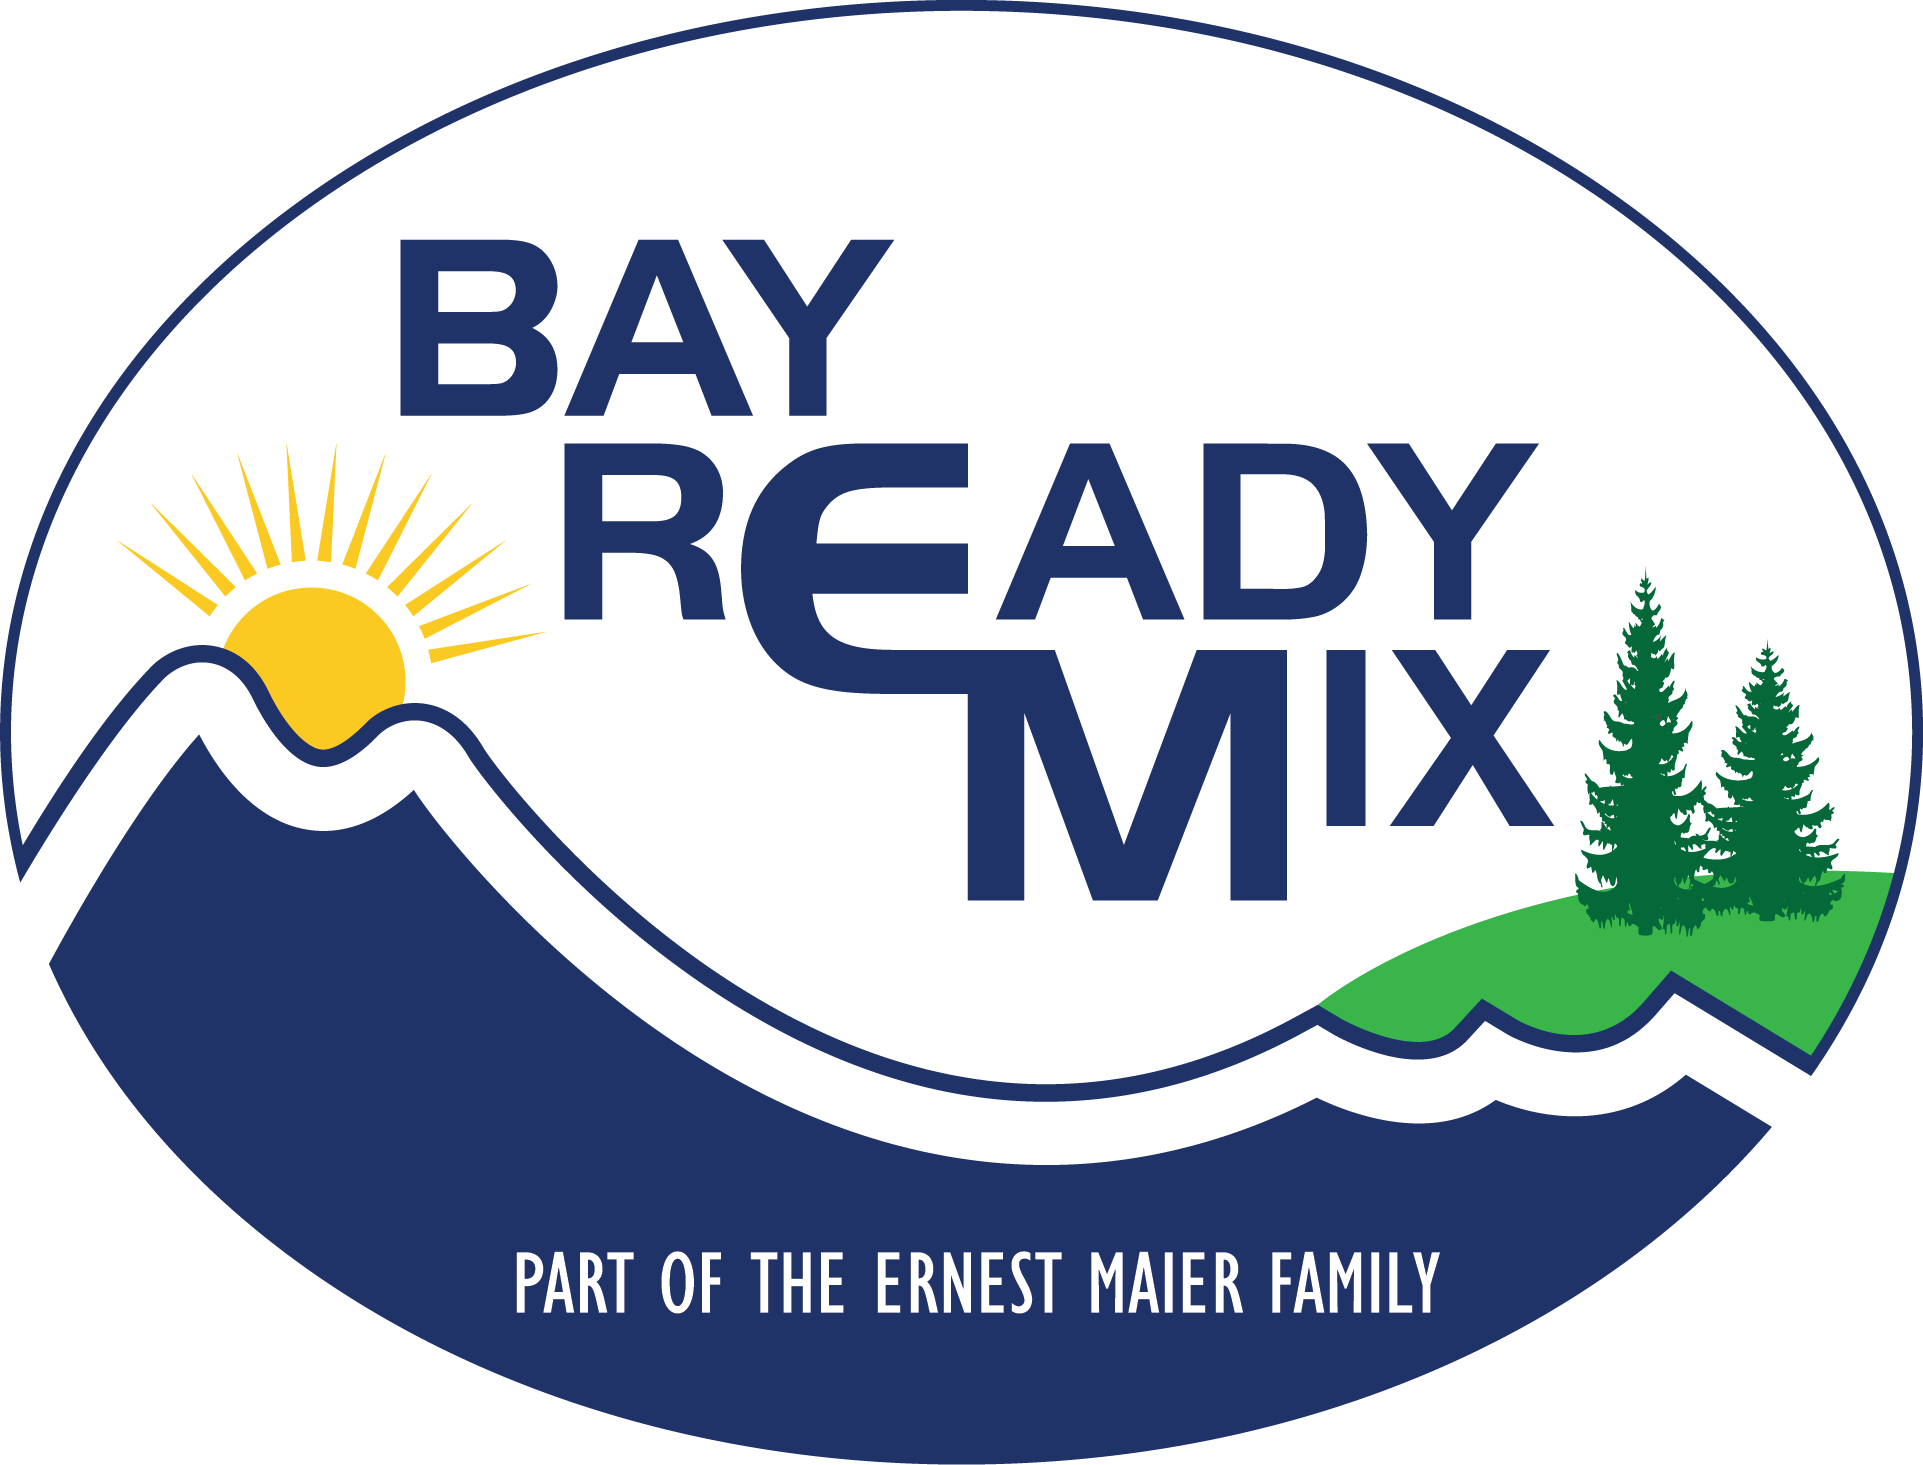 Bay Ready Mix - Part of the Ernest Maier Family